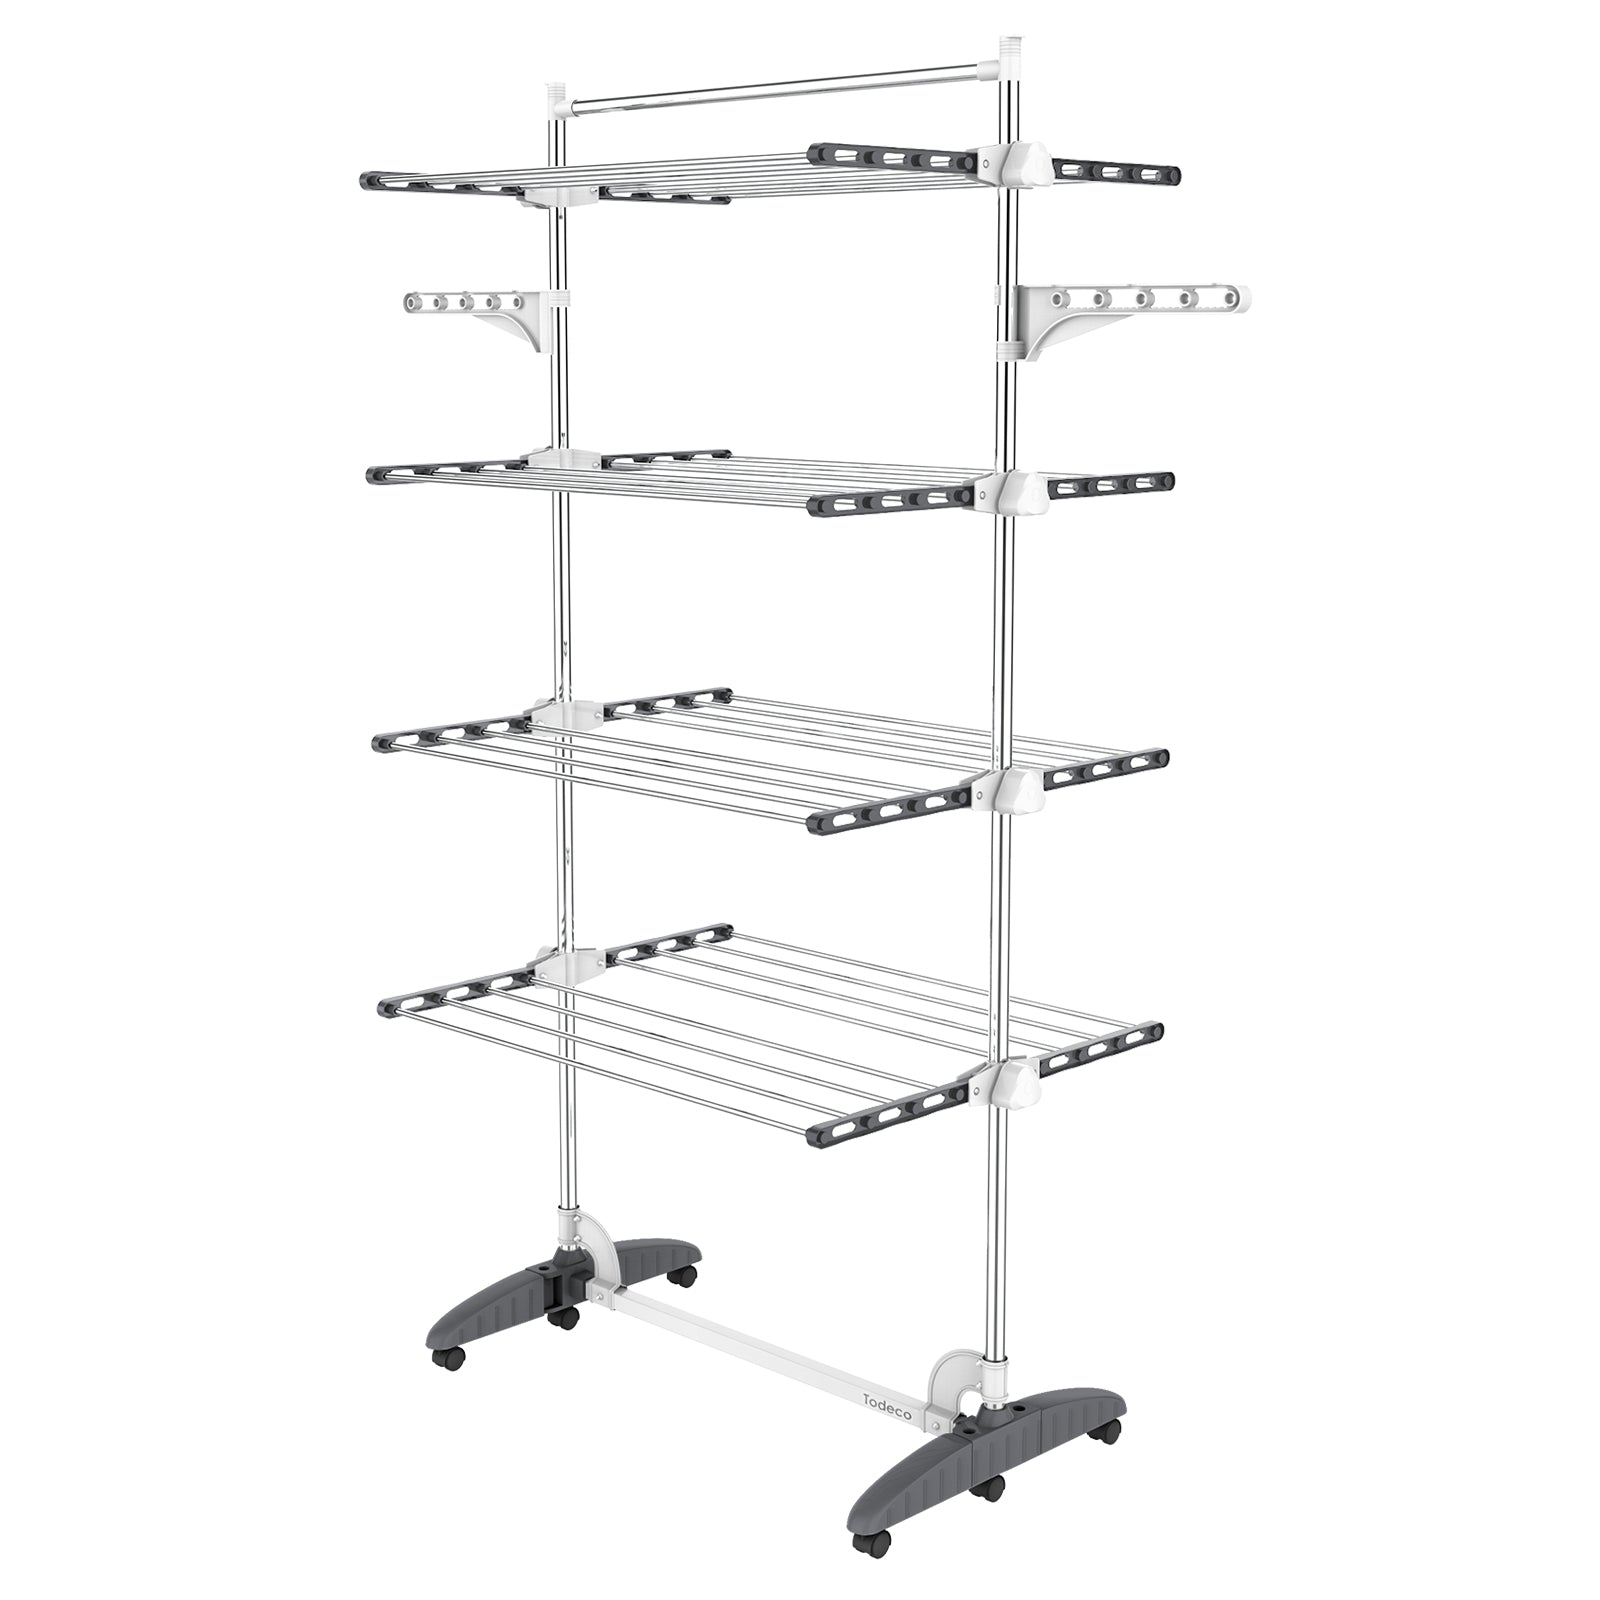 Clothes Drying Rack, 4 shelves (wings/top bar, Grey/White)